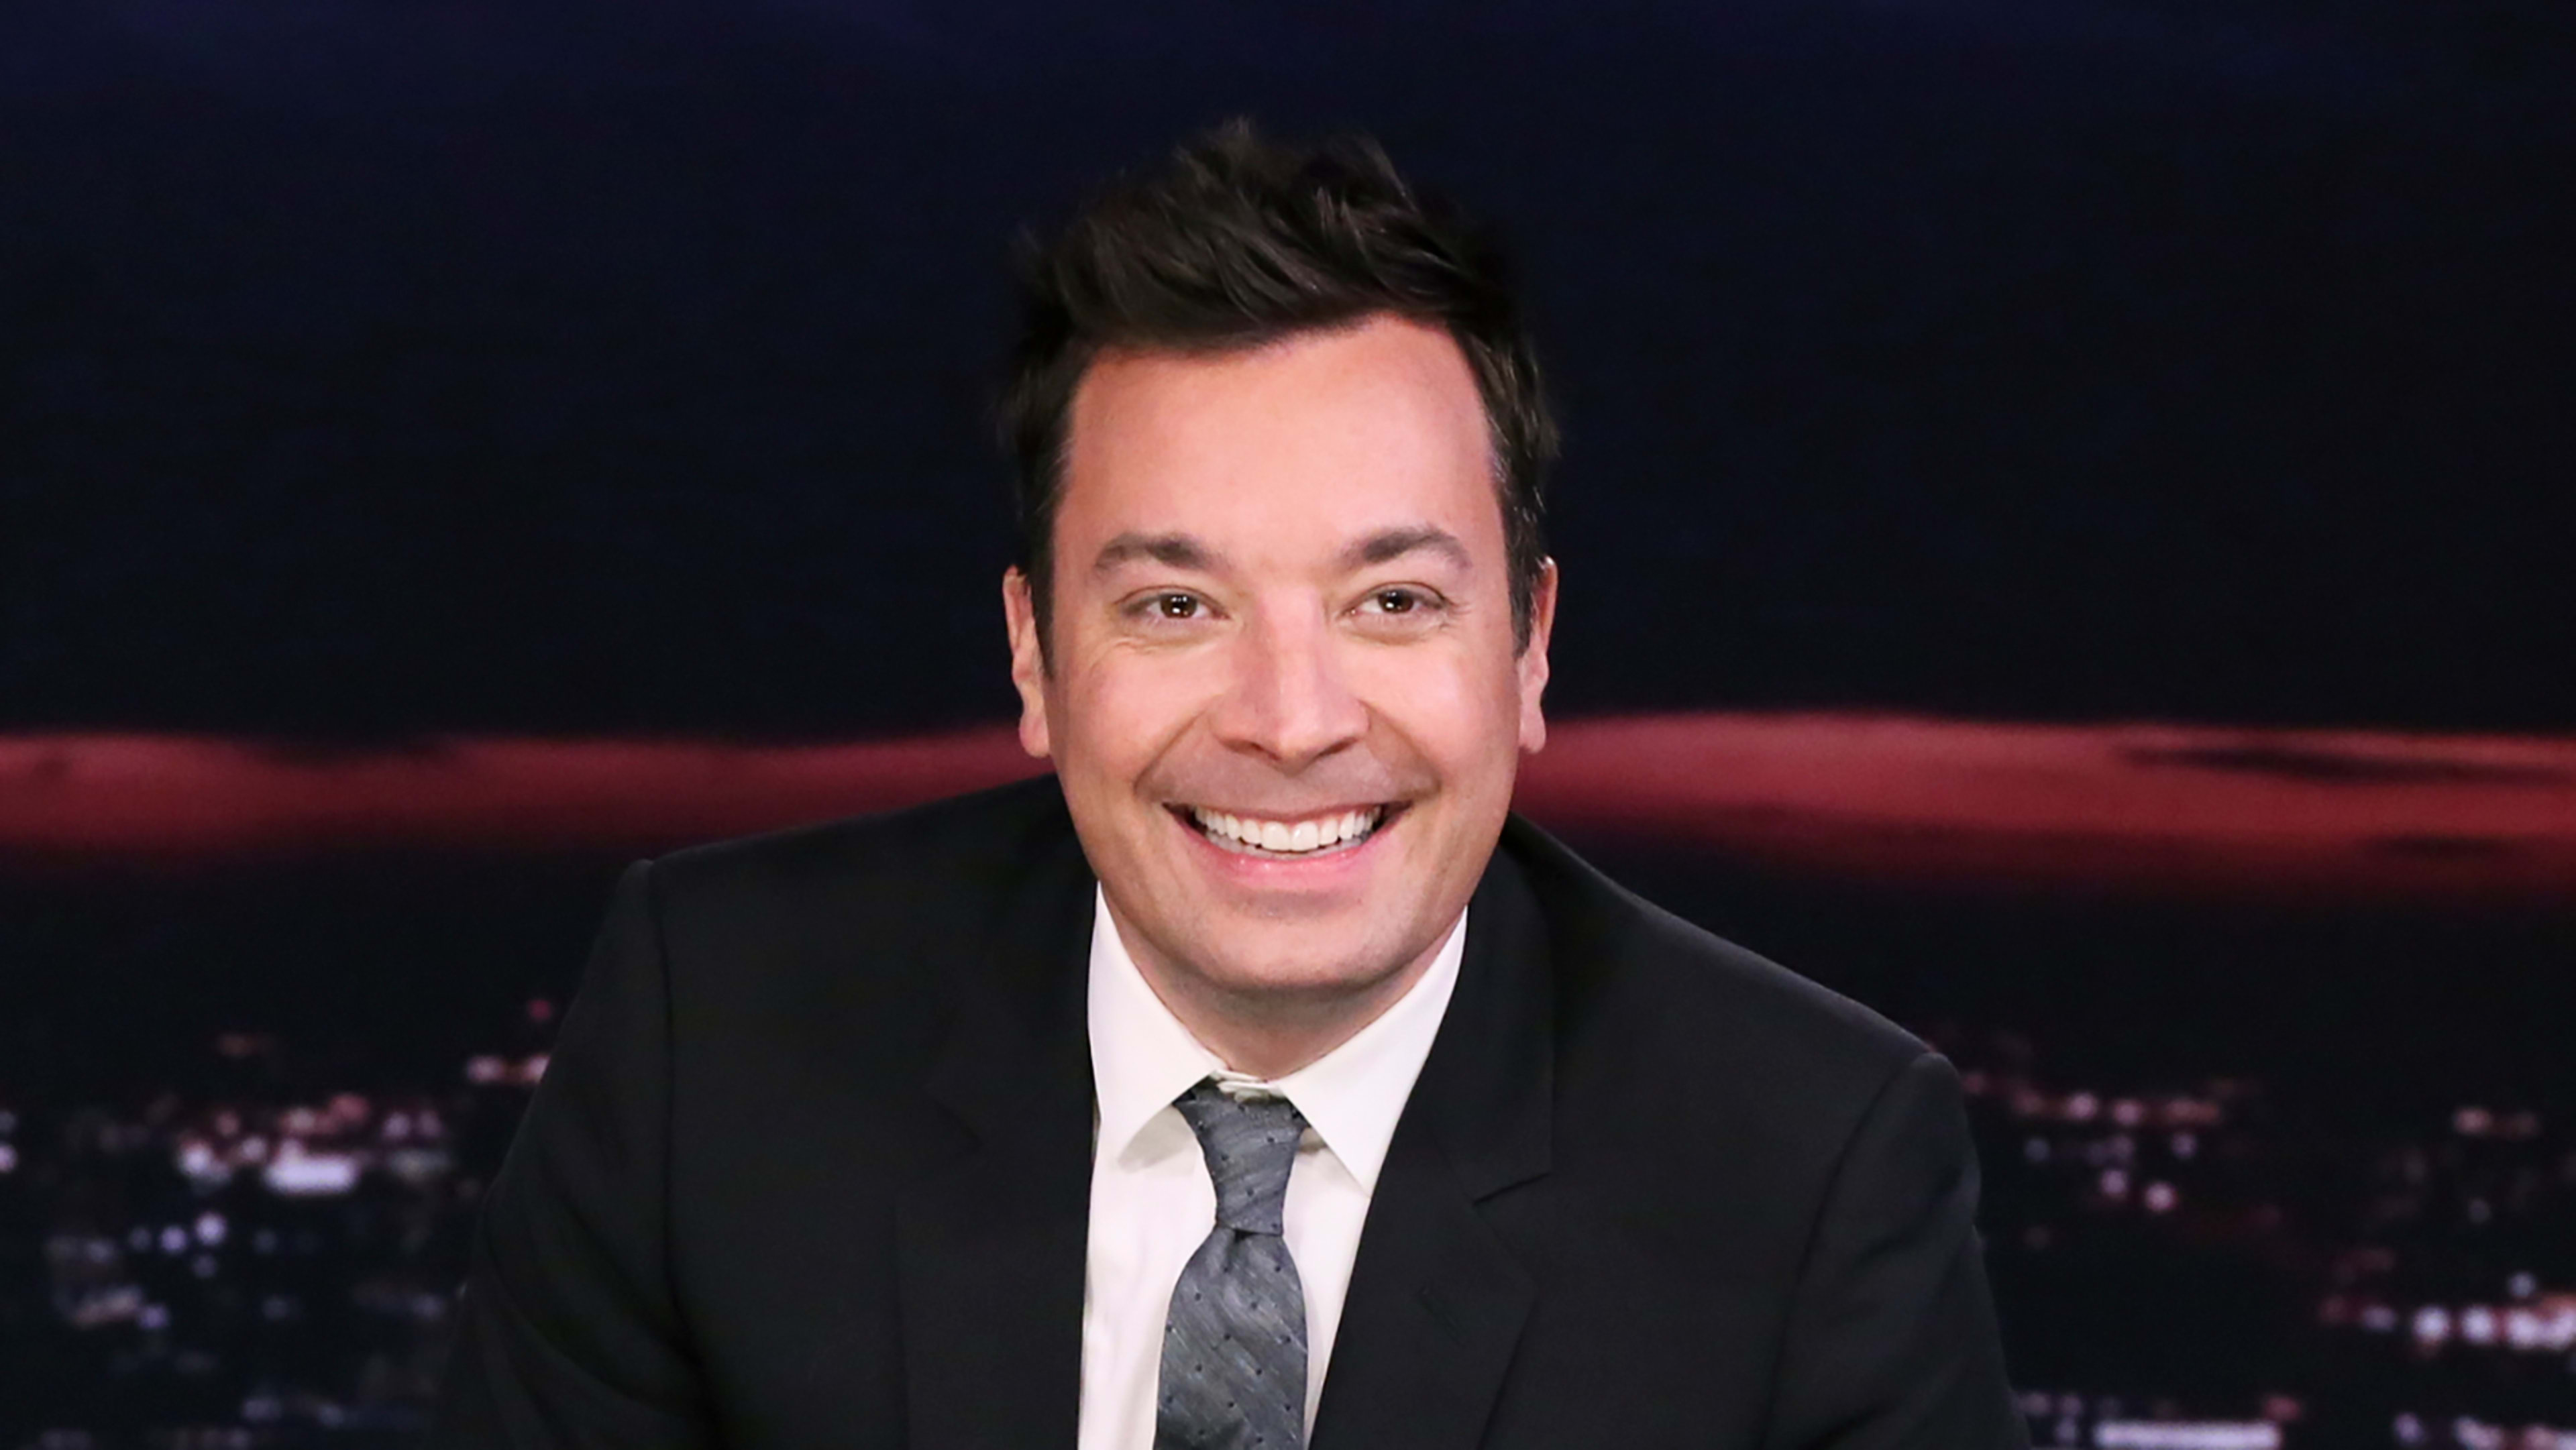 The Tonight Show and Jimmy Fallon just hit a big YouTube milestone